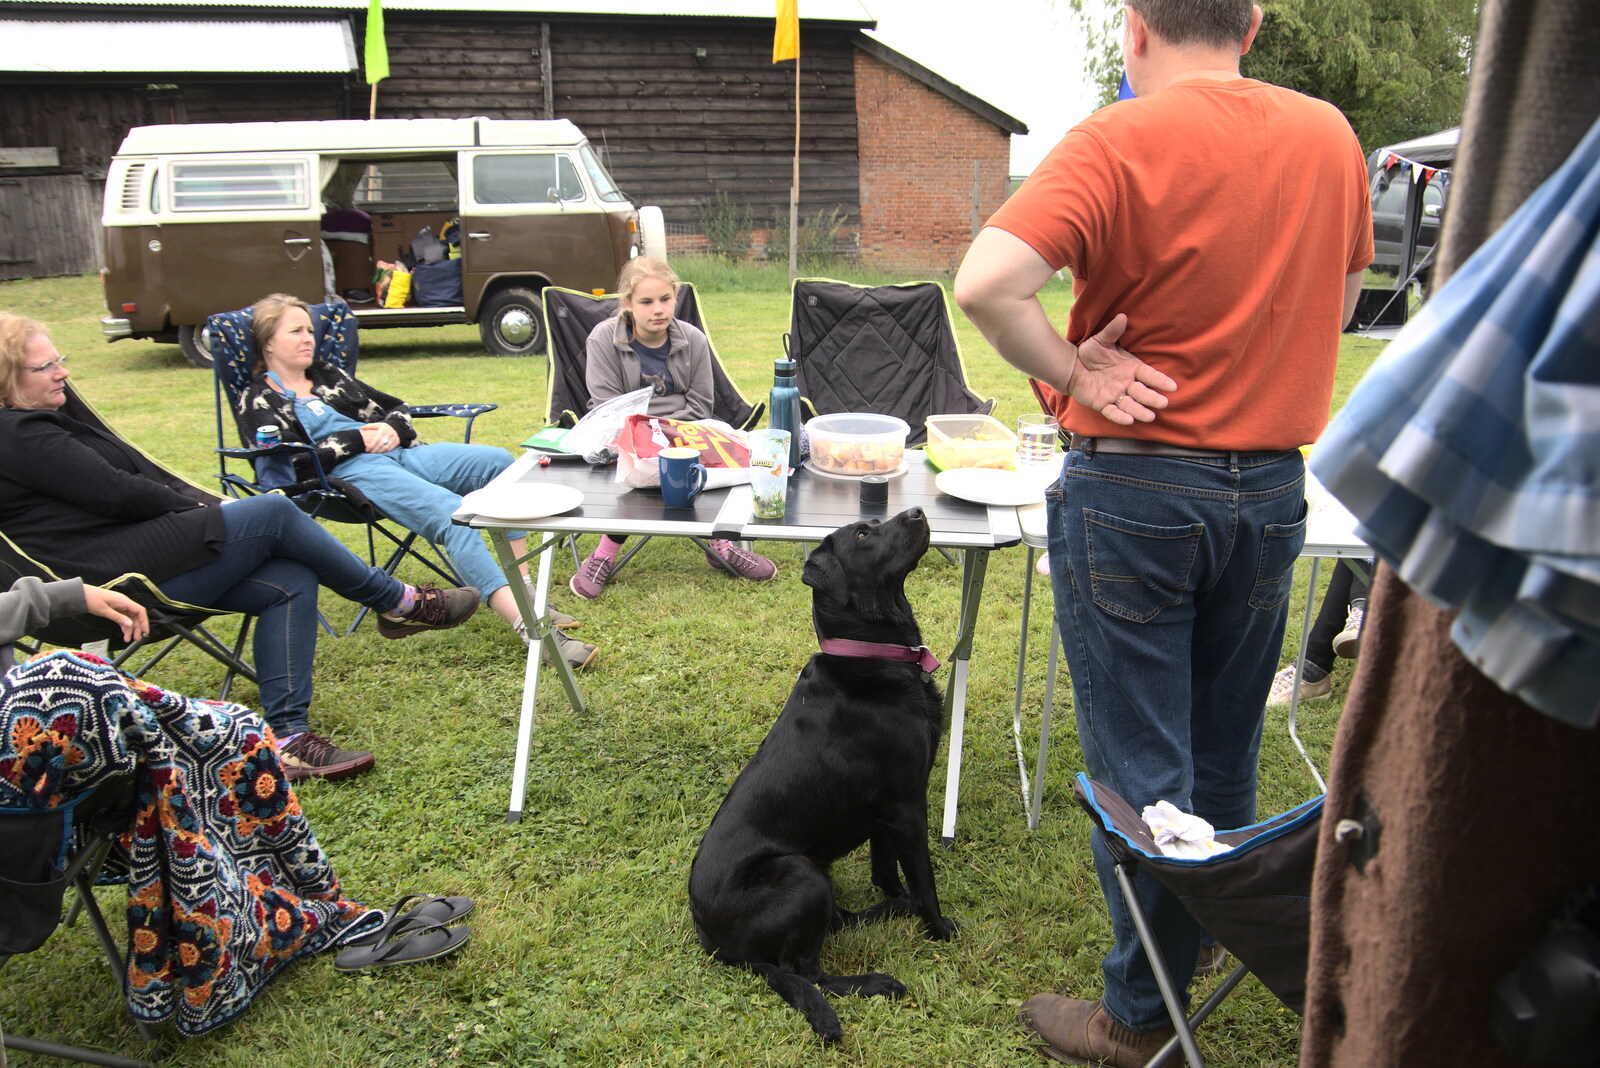 Tilly Dog hopes to get some scraps from Suze-fest, Braisworth, Suffolk - 19th June 2021